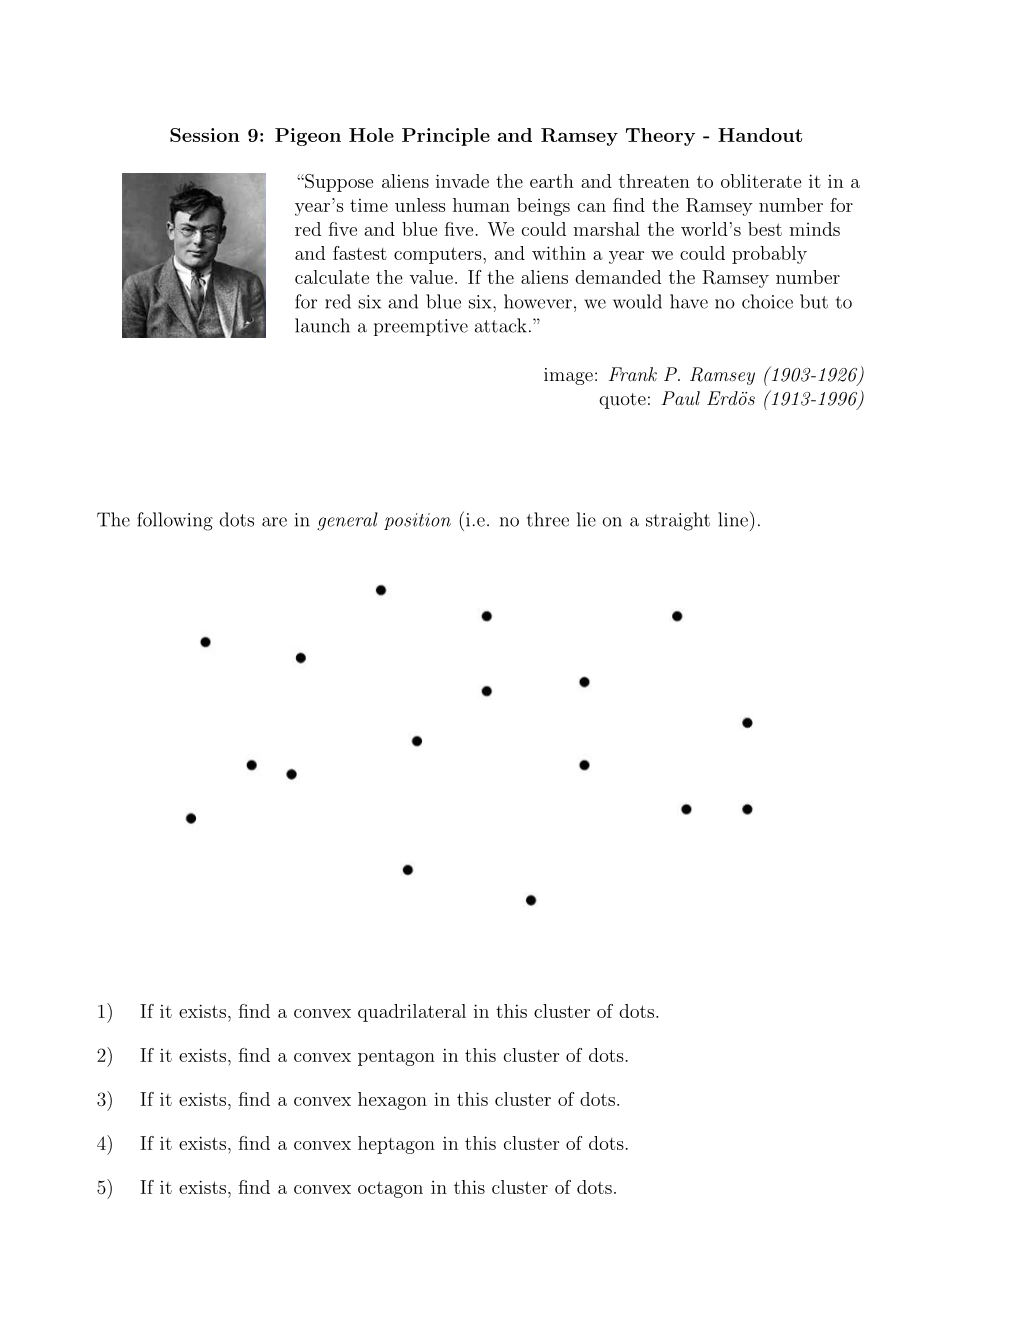 Session 9: Pigeon Hole Principle and Ramsey Theory - Handout